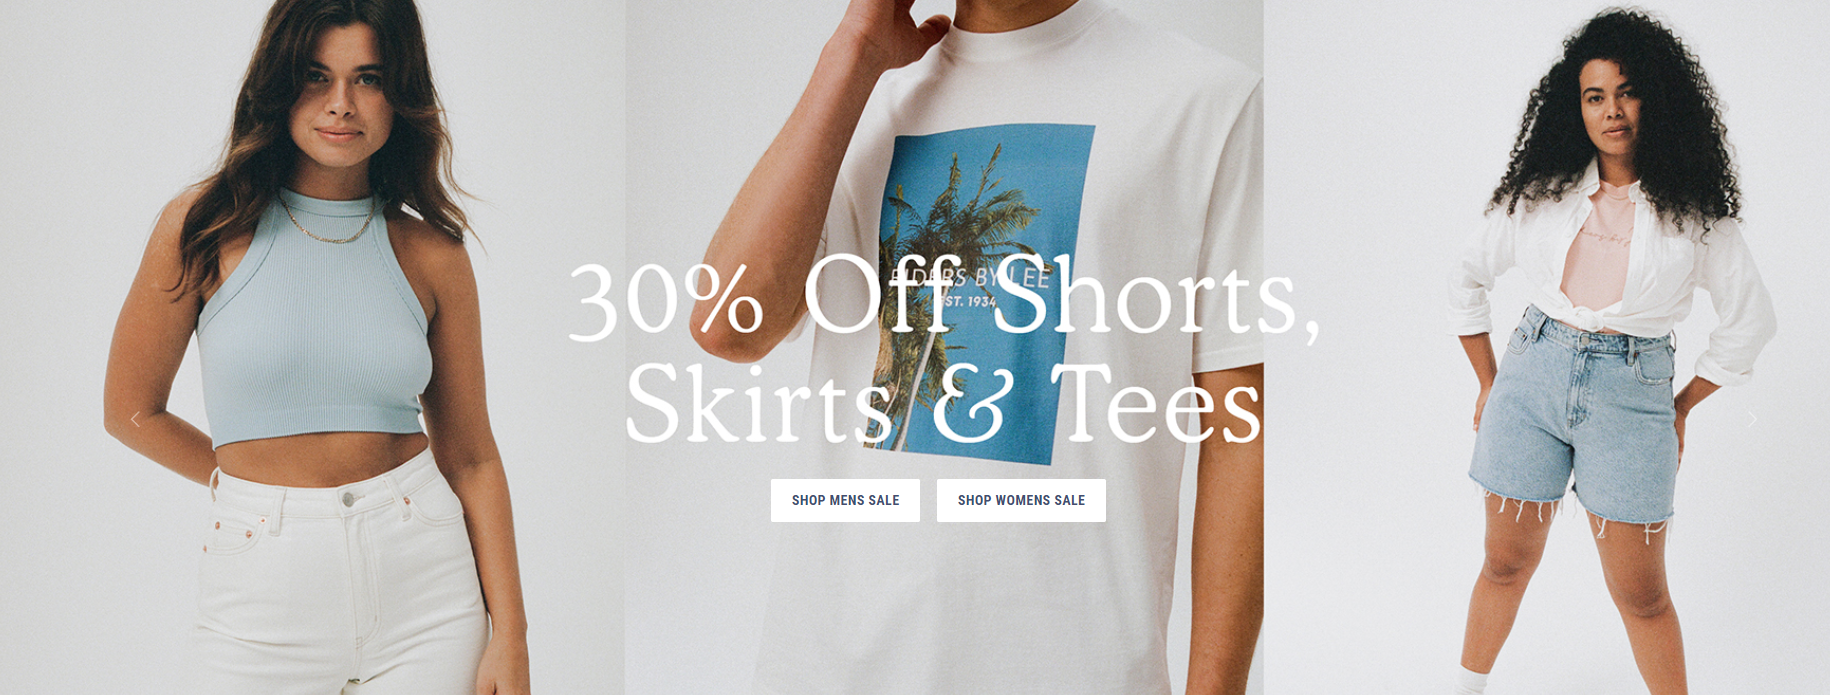 30% OFF shorts, skirts & tees @ Riders By Lee